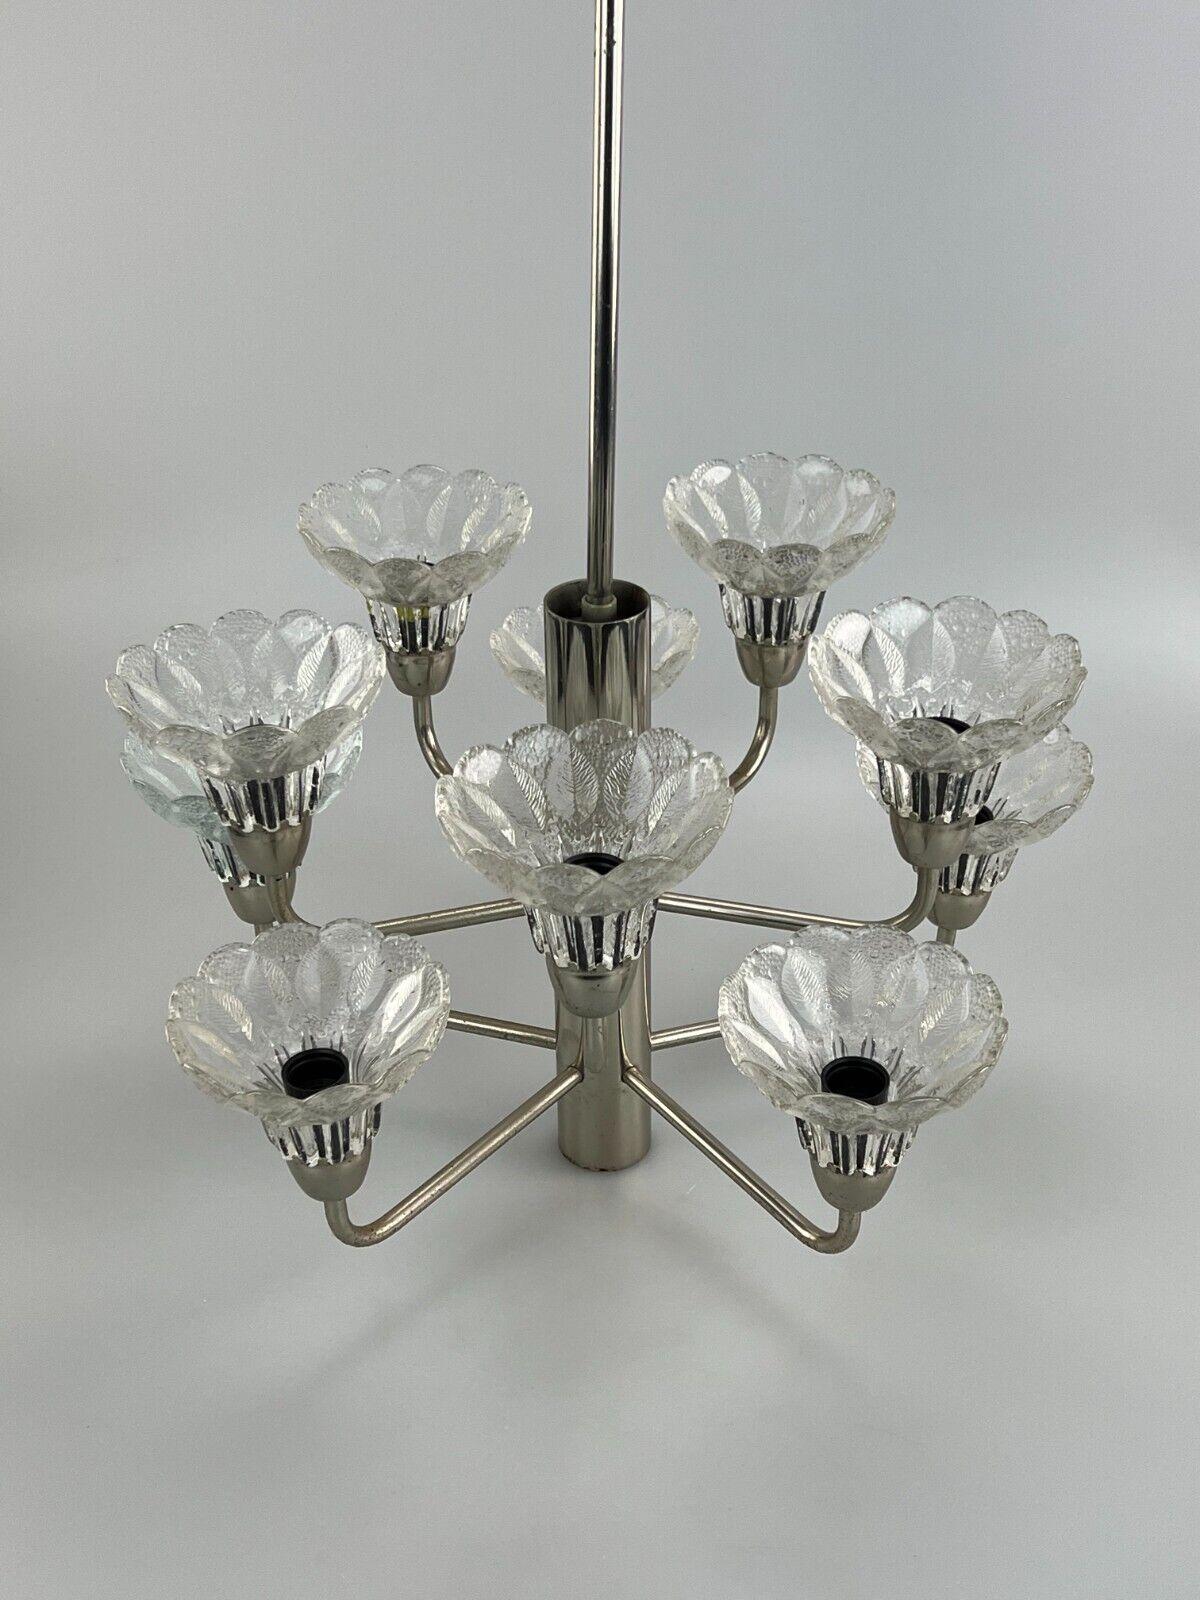 60s 70s Lamp Fixture Chandelier Glass Space Age Design In Good Condition For Sale In Neuenkirchen, NI